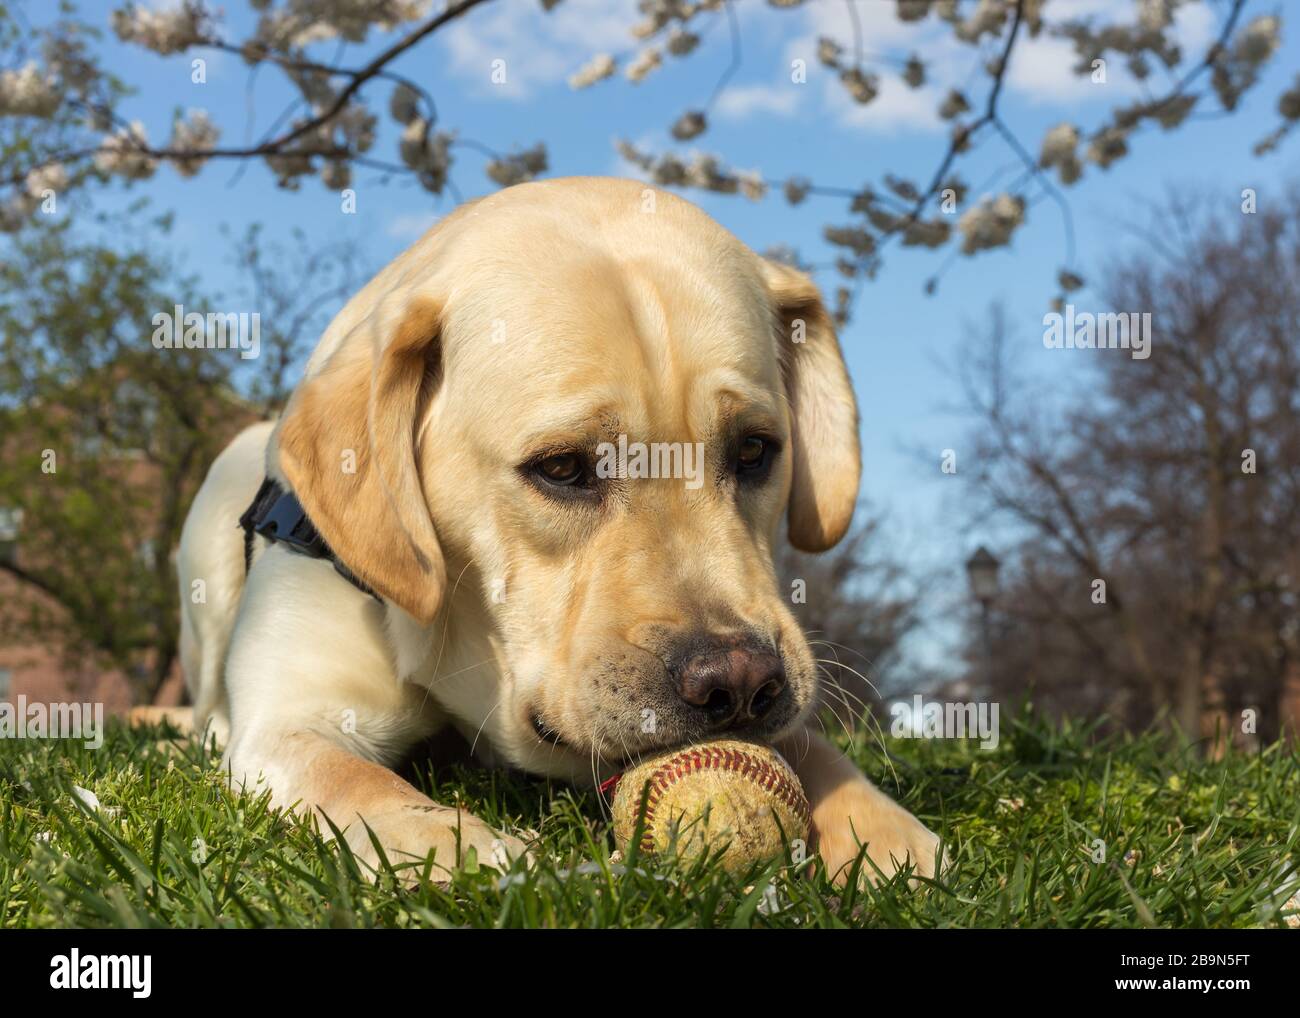 Young yellow labrador retriever in training to be a service dog has fun playing with a baseball found in a public park as cherry blossom bloom behind Stock Photo